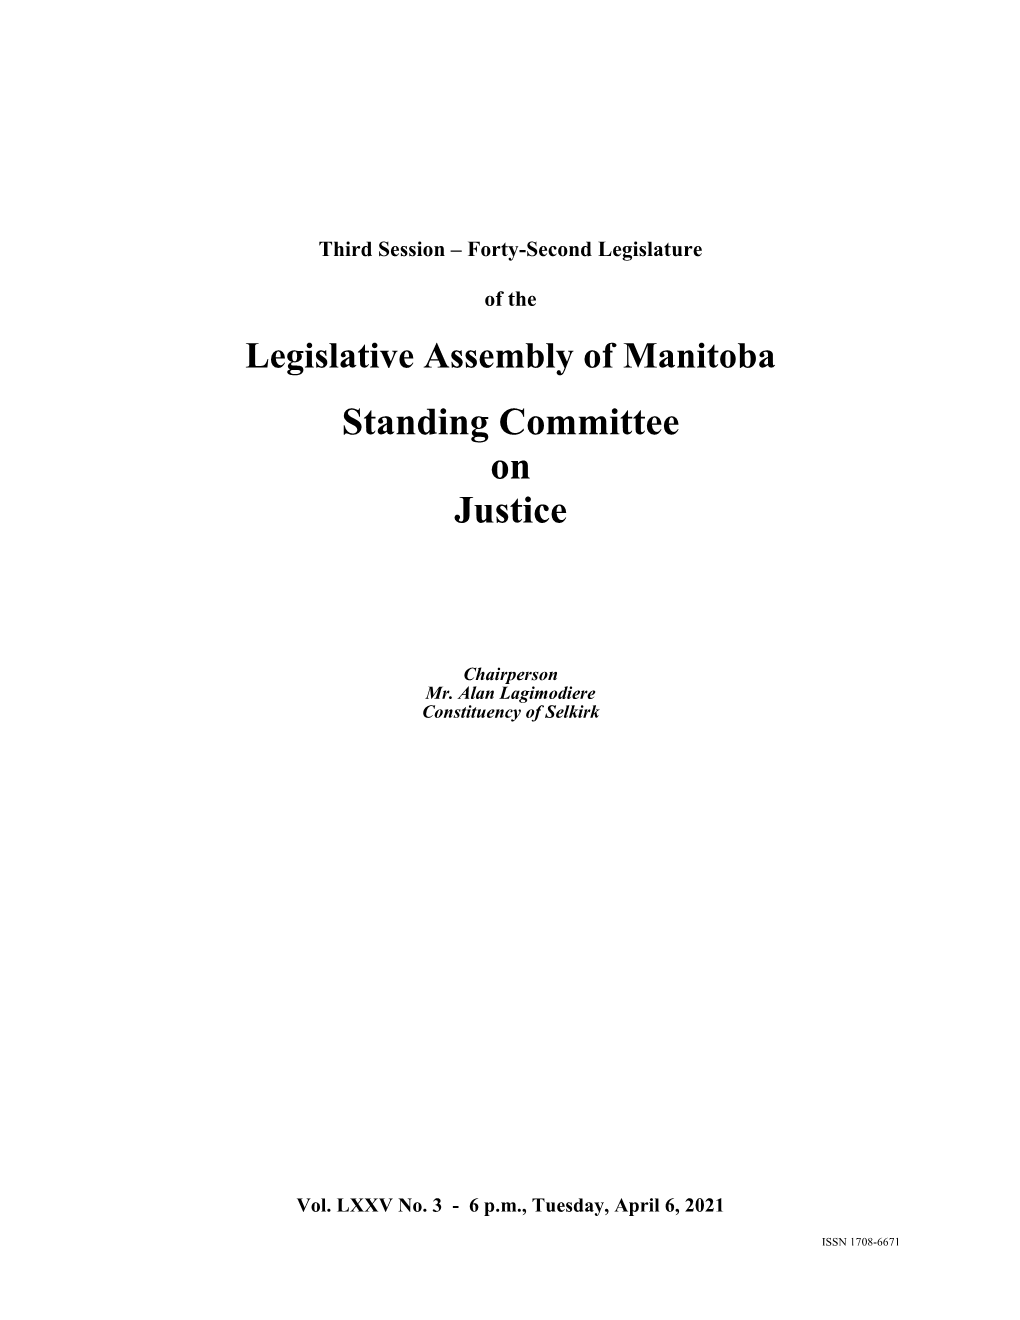 Legislative Assembly of Manitoba Standing Committee on Justice